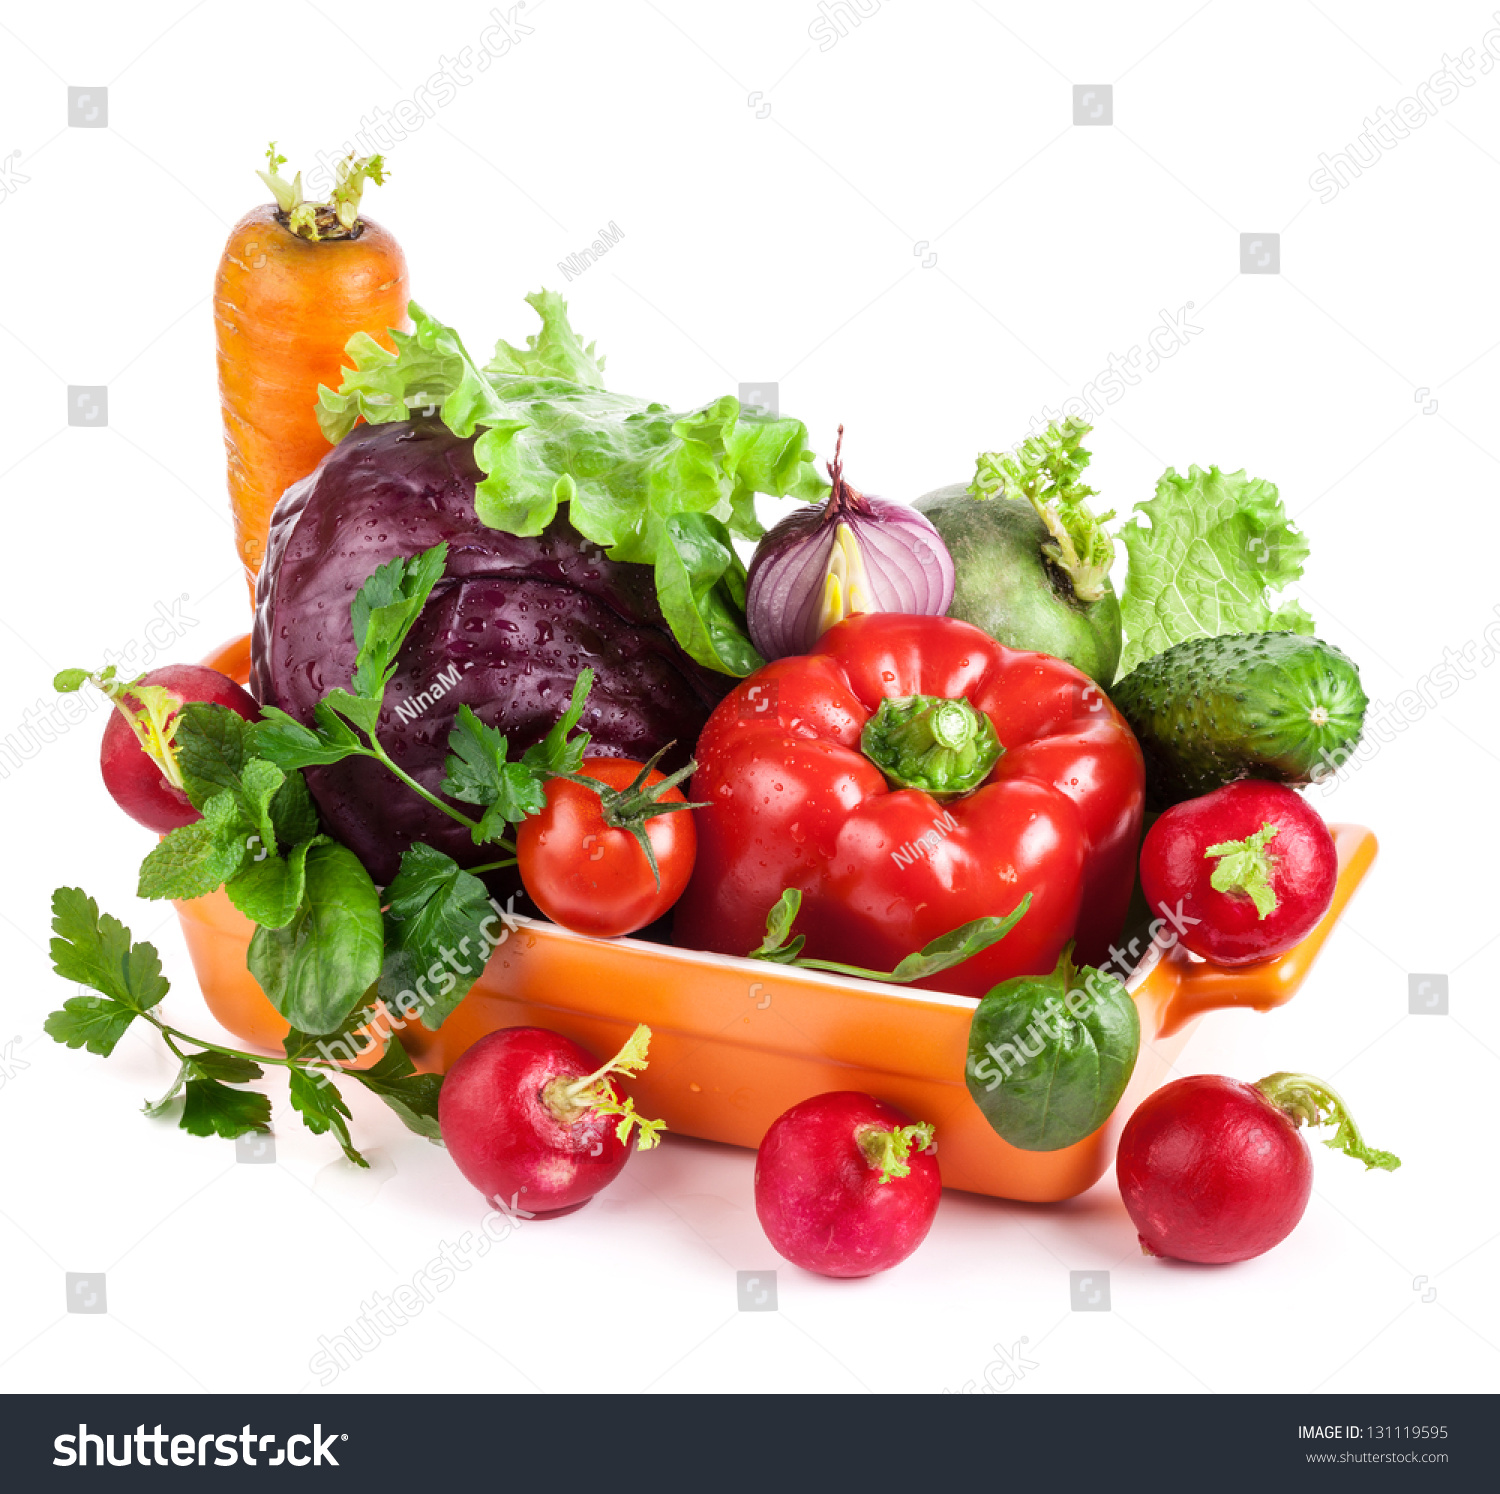 Fresh Vegetables In Bowl Isolated On White Background Stock Photo ...